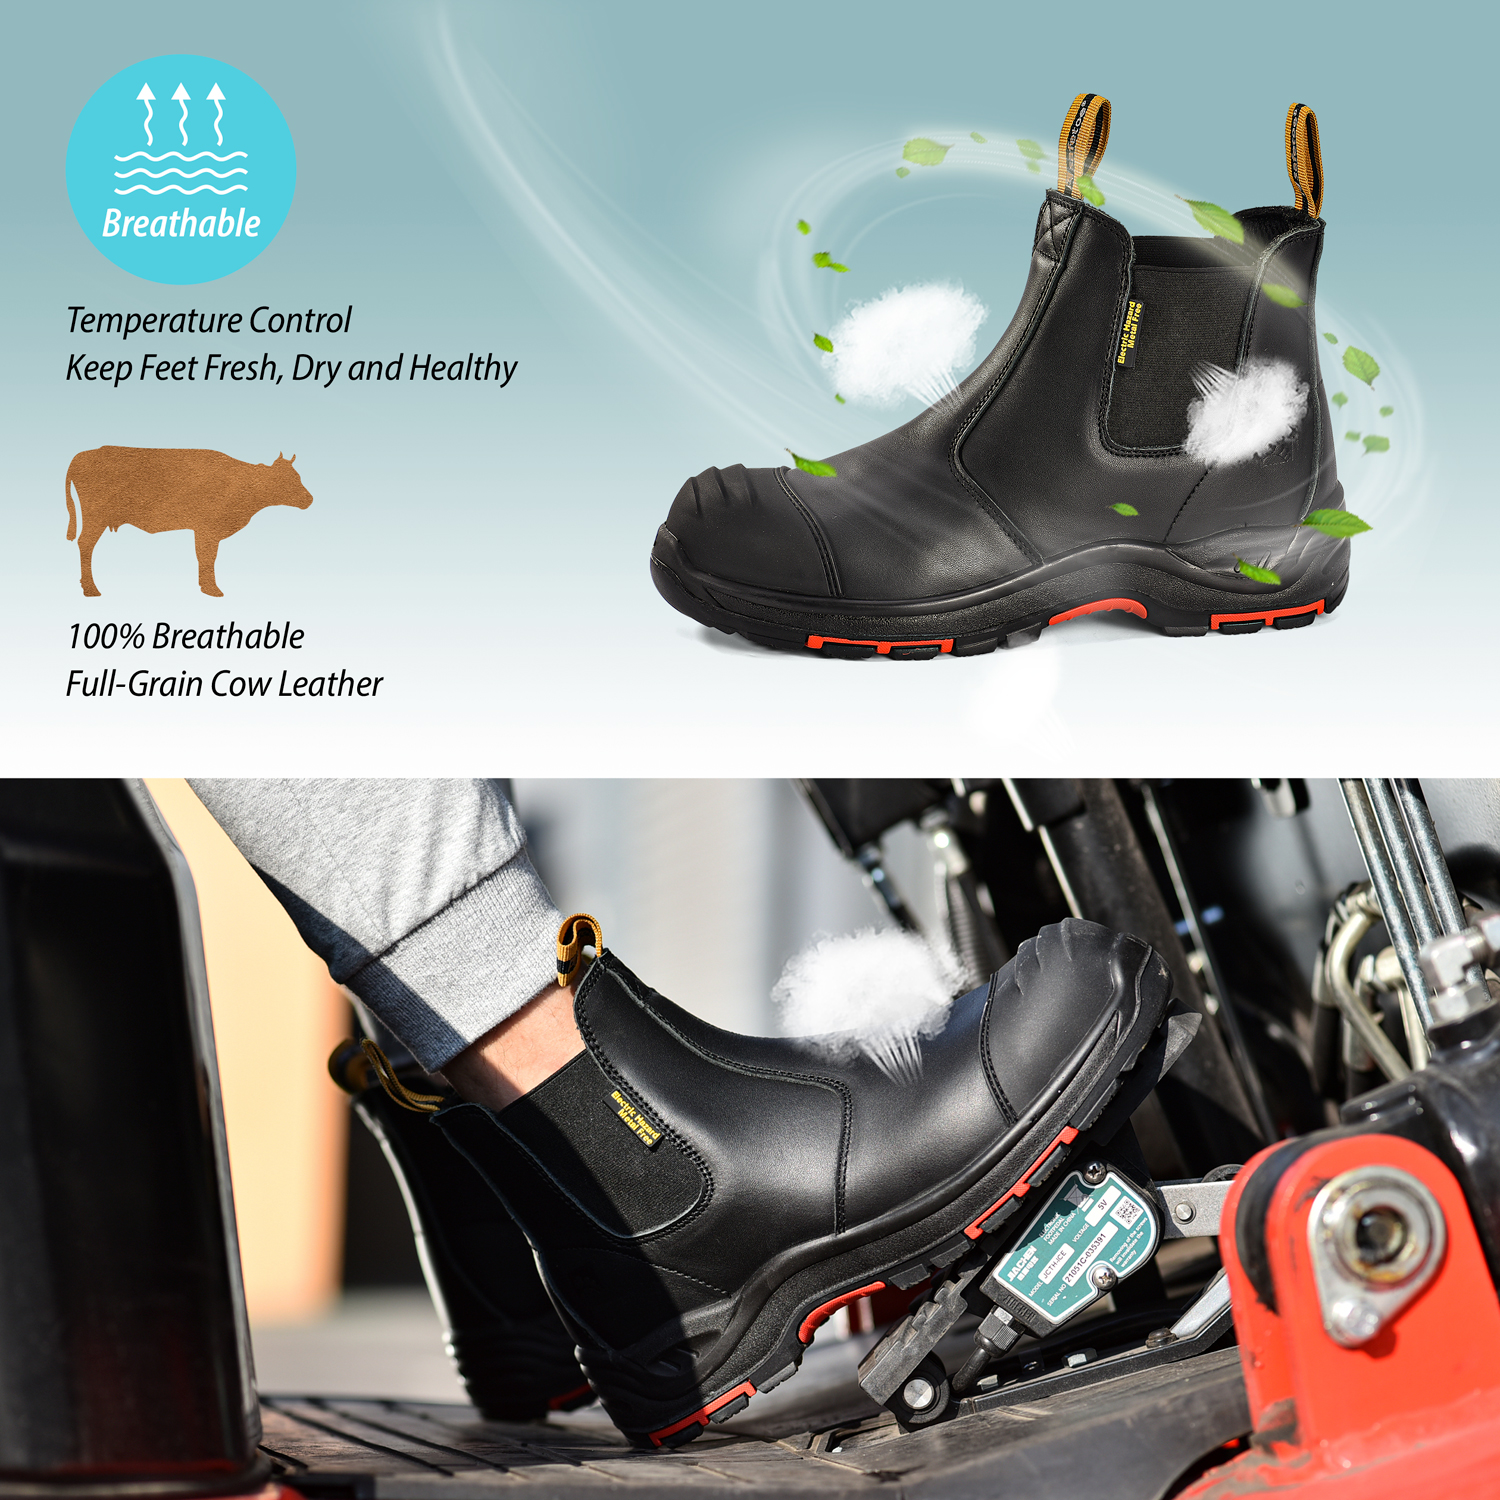 Csa Approved Canadian Green Triangle Safety Work Boots M-8025NBK